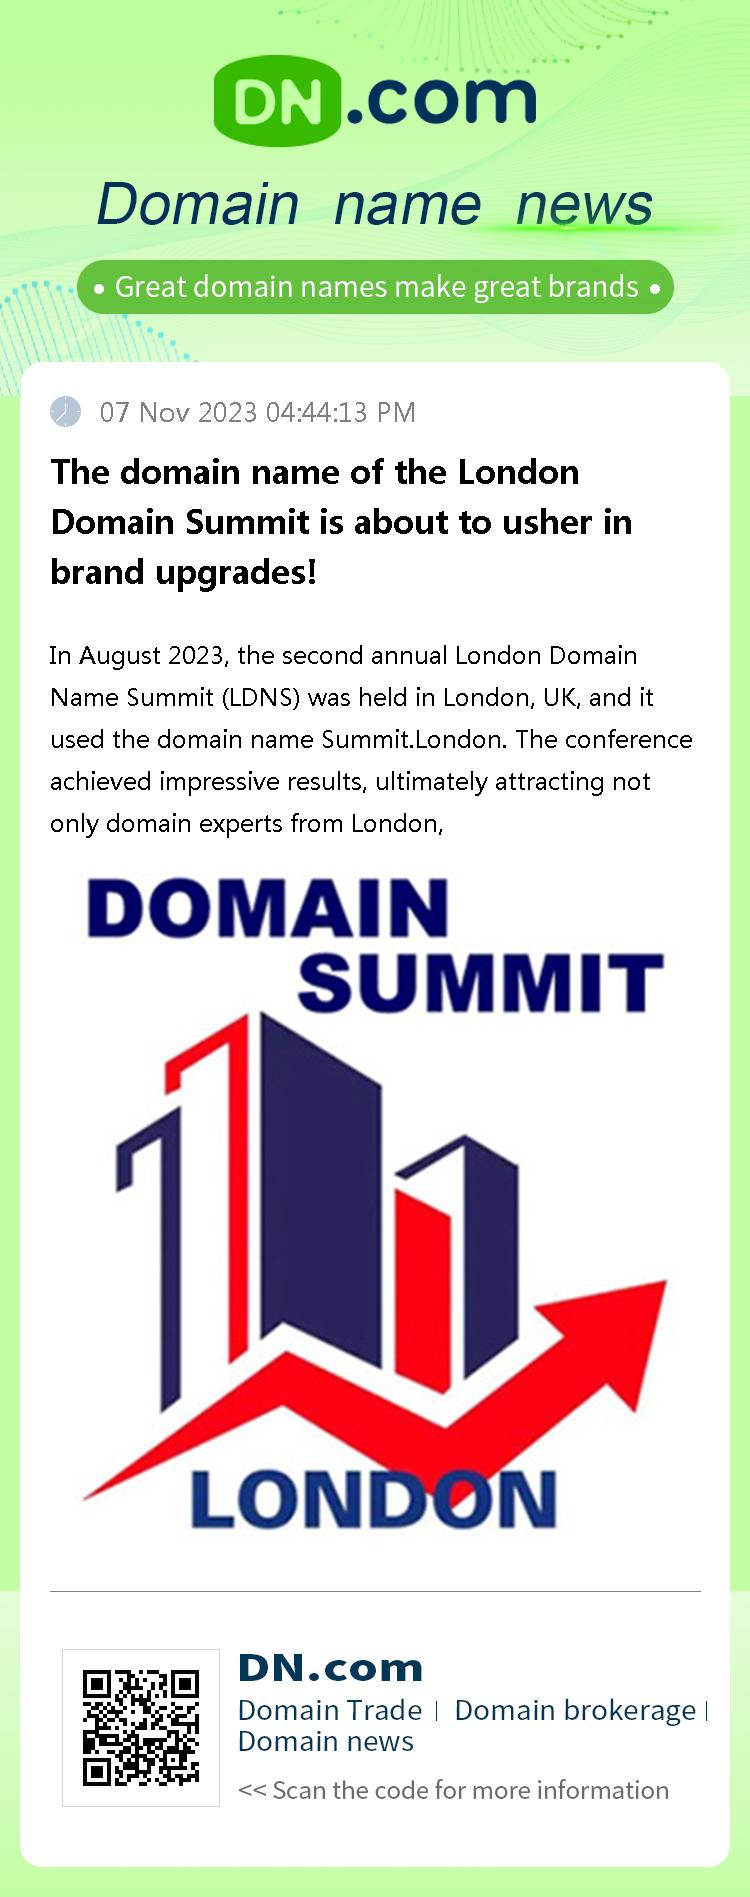 The domain name of the London Domain Summit is about to usher in brand upgrades!